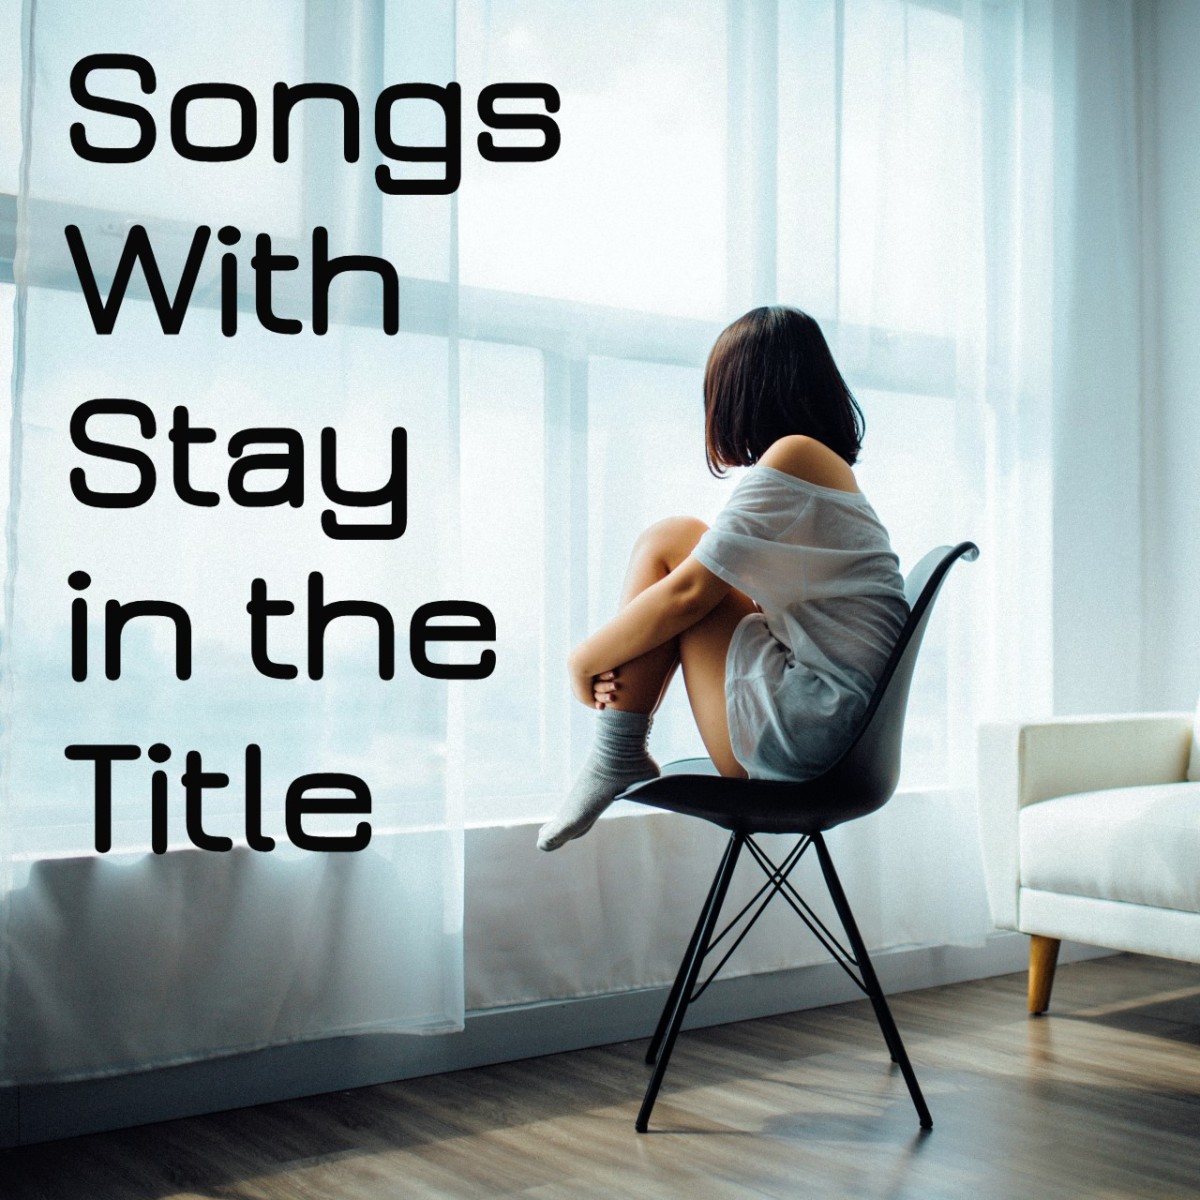 Celebrate pop, rock, country, and R&B songs with stay in the title with this playlist. Whether you're making a request to stay together, stay the night, stay awake, or even telling someone don't stay, there's a song just for you!